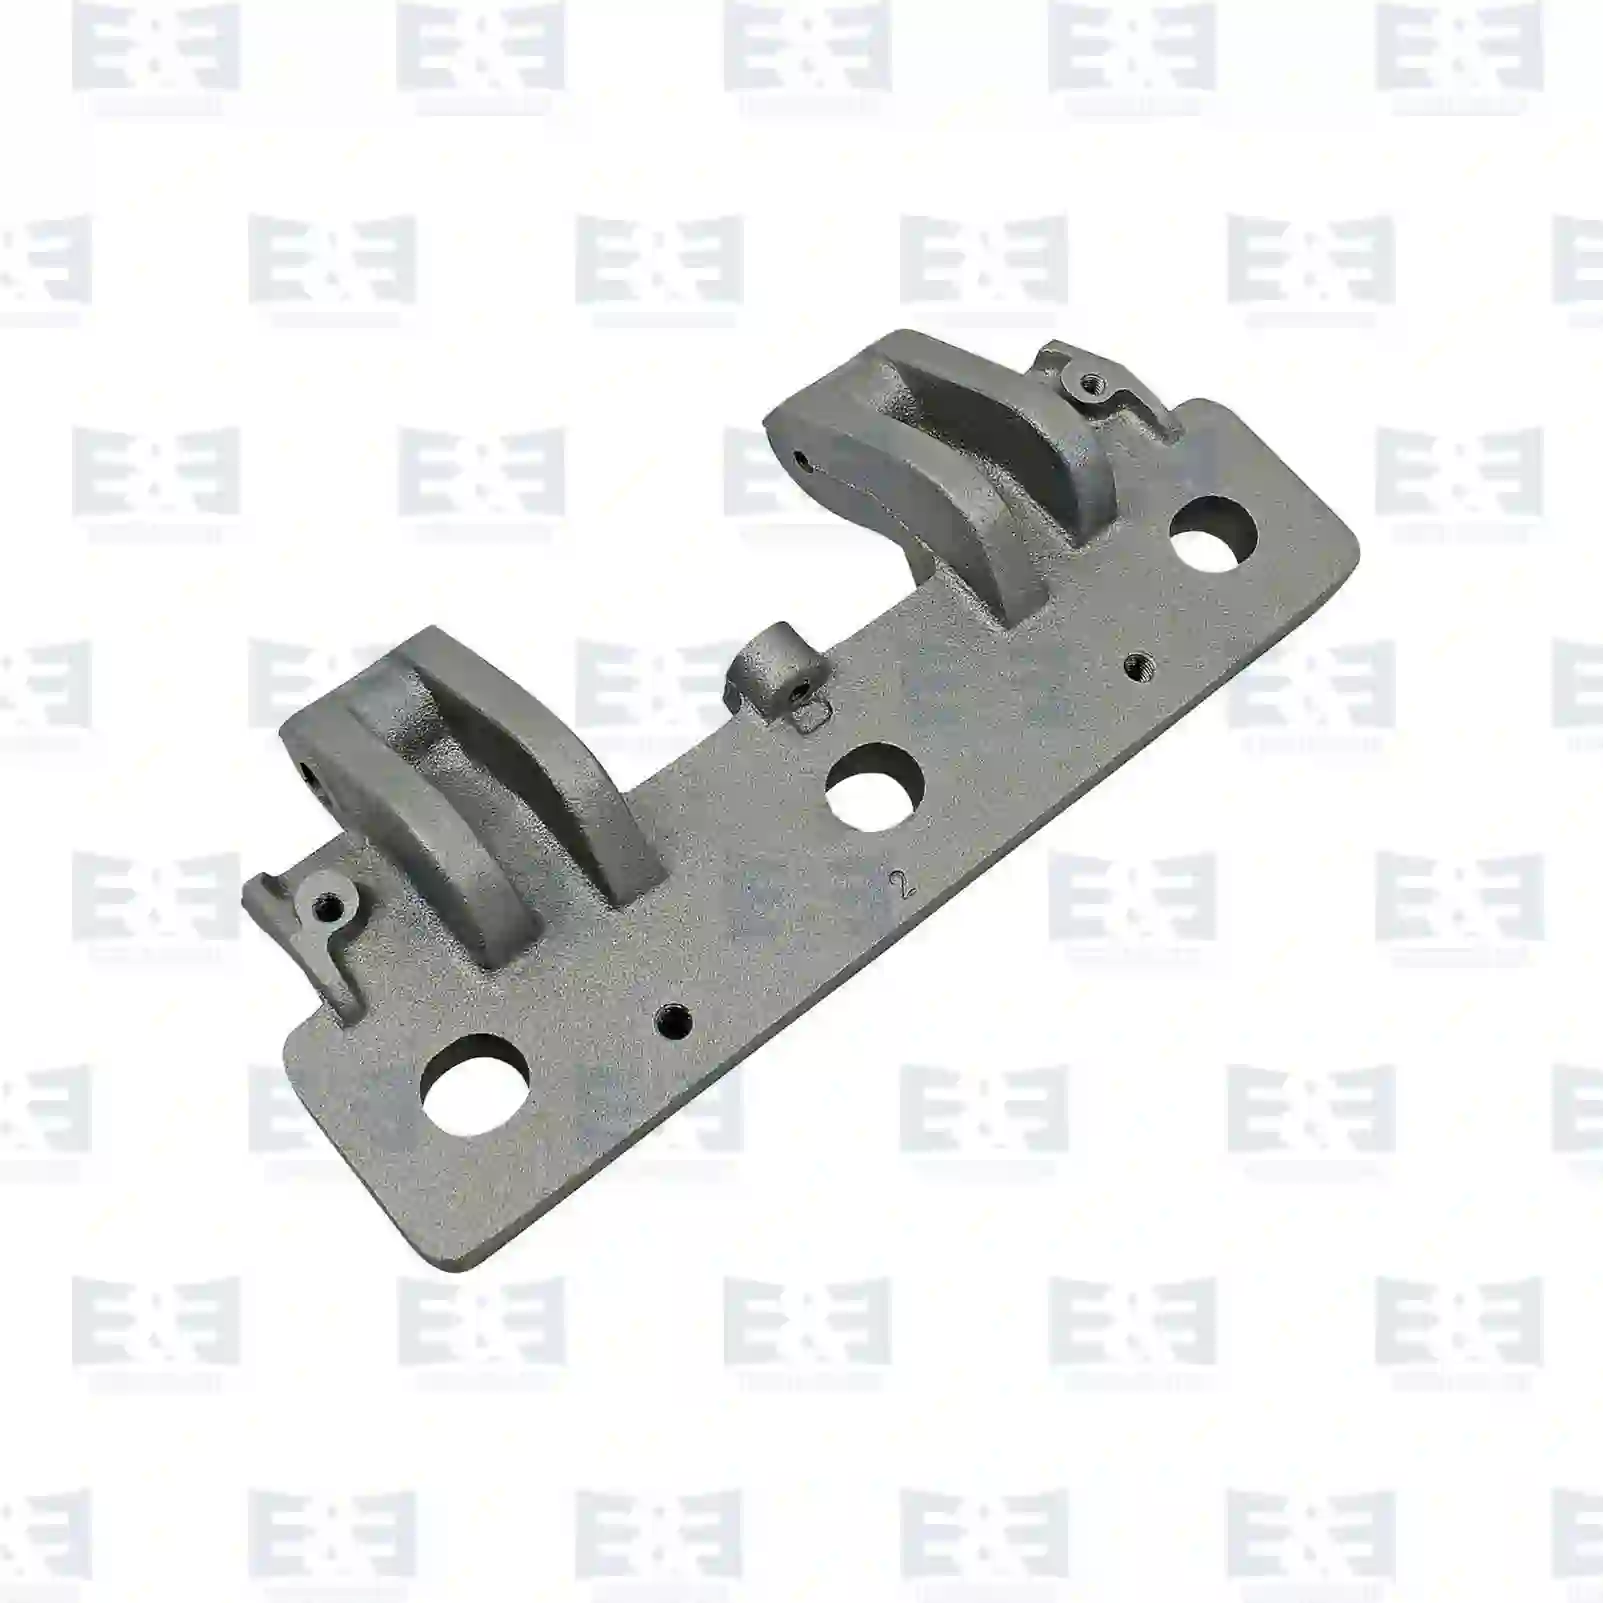 Hinge, front grill, without rubber buffer, 2E2291350, 1336467, 1434957, 1672923, 1735004 ||  2E2291350 E&E Truck Spare Parts | Truck Spare Parts, Auotomotive Spare Parts Hinge, front grill, without rubber buffer, 2E2291350, 1336467, 1434957, 1672923, 1735004 ||  2E2291350 E&E Truck Spare Parts | Truck Spare Parts, Auotomotive Spare Parts